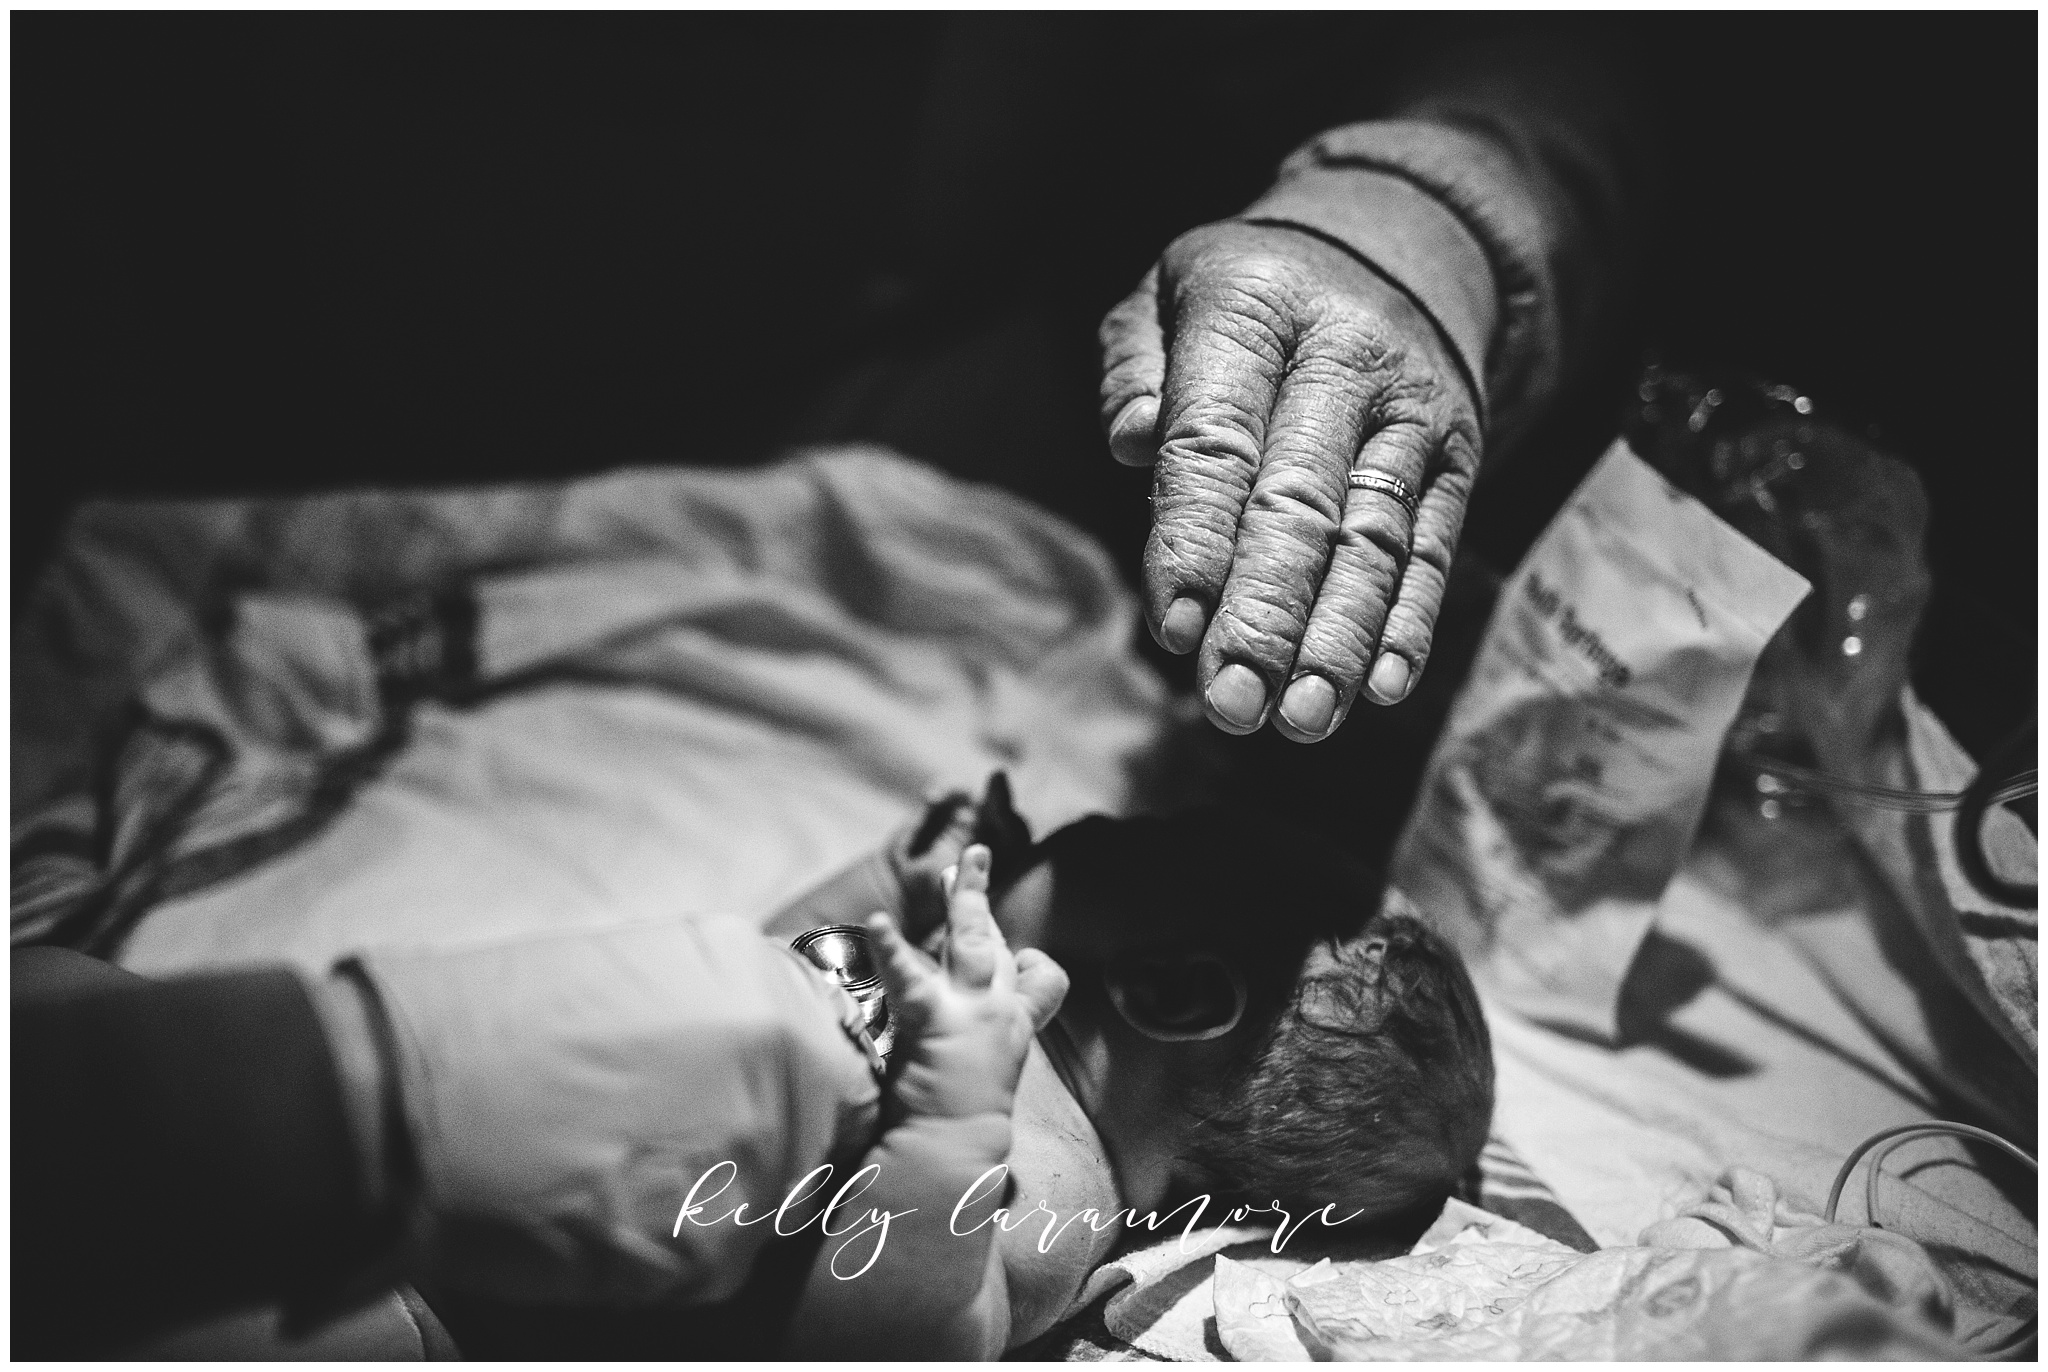 st louis birth story photographer, st louis family photographer, missouri baptist birth center birth, delivery room, dad hands